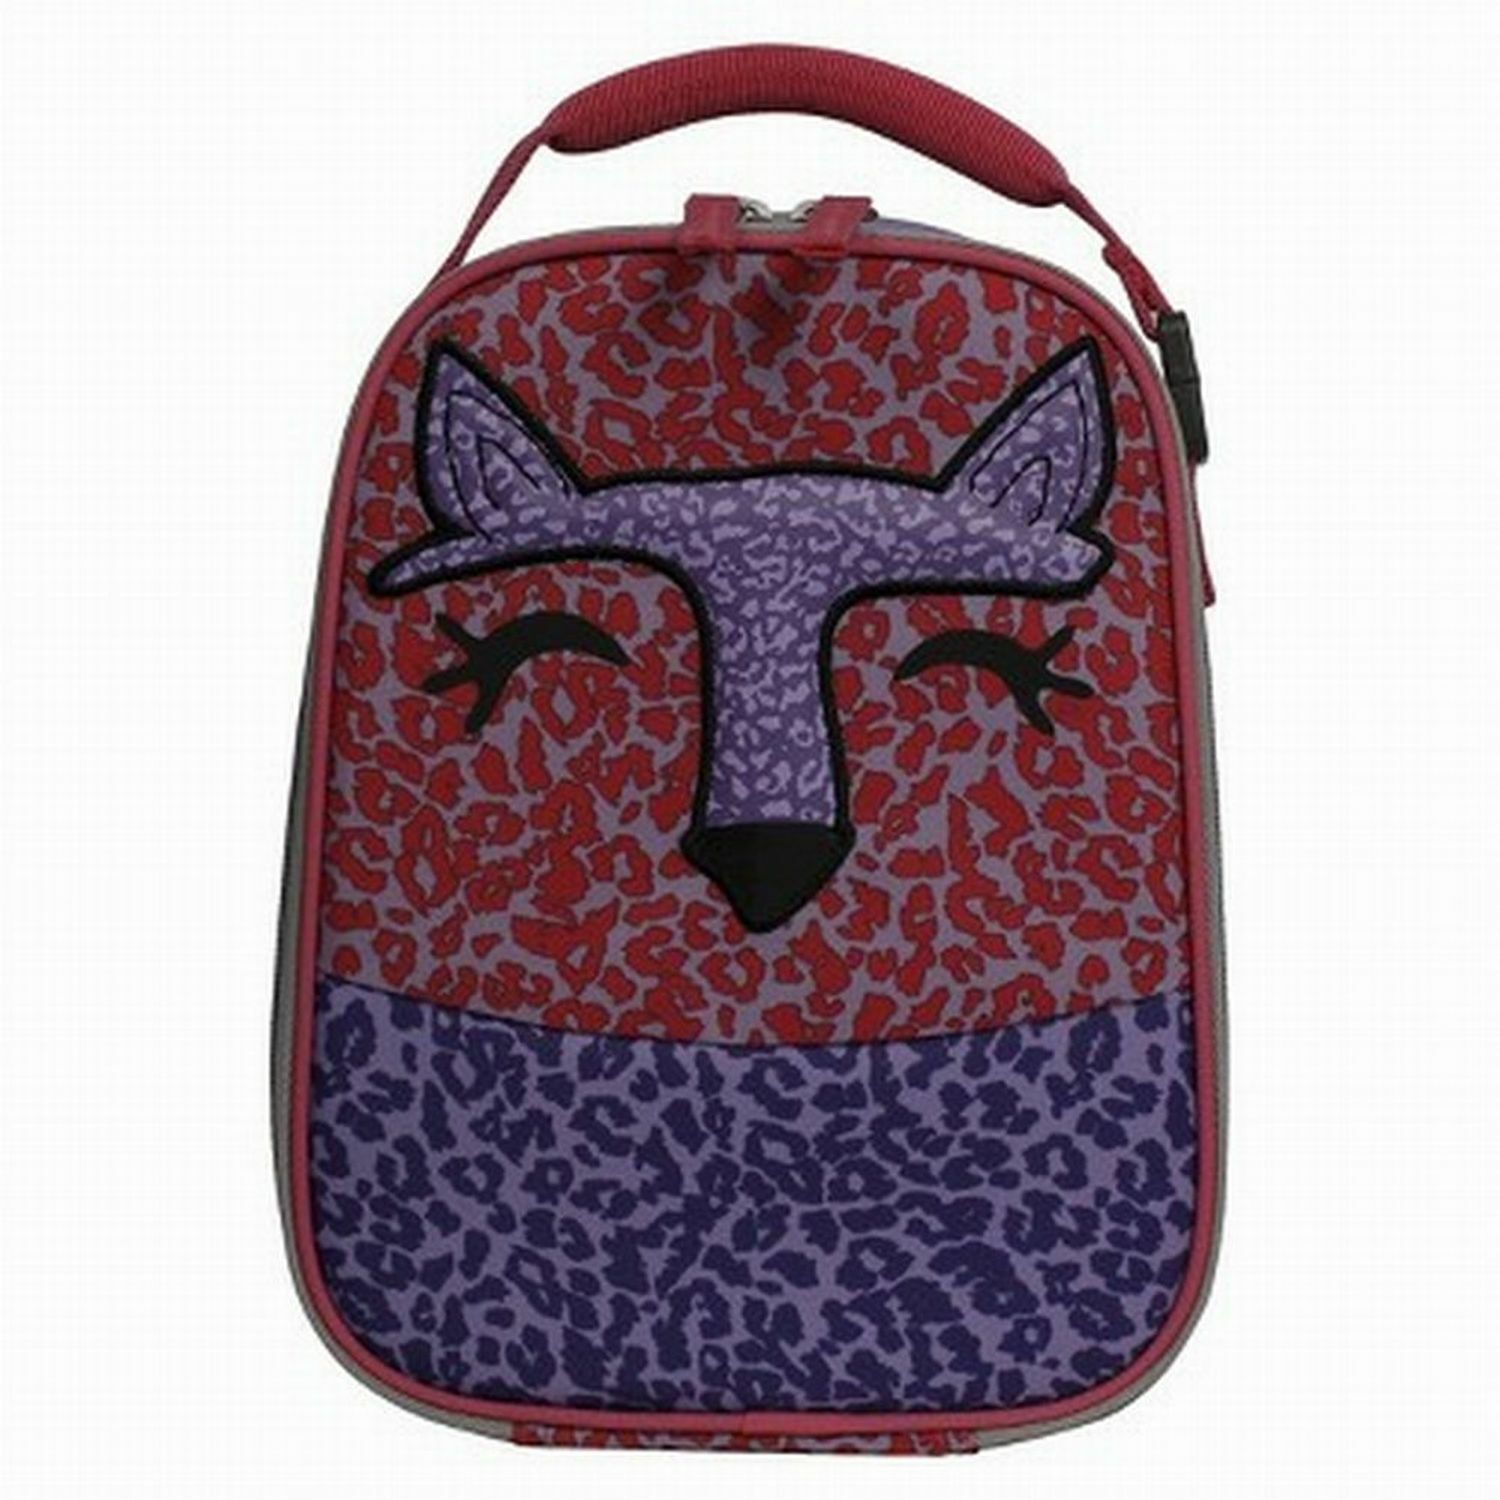 Pink & Purple Cheetah Lunch Box Insulated Lunch Bag Lunchbox